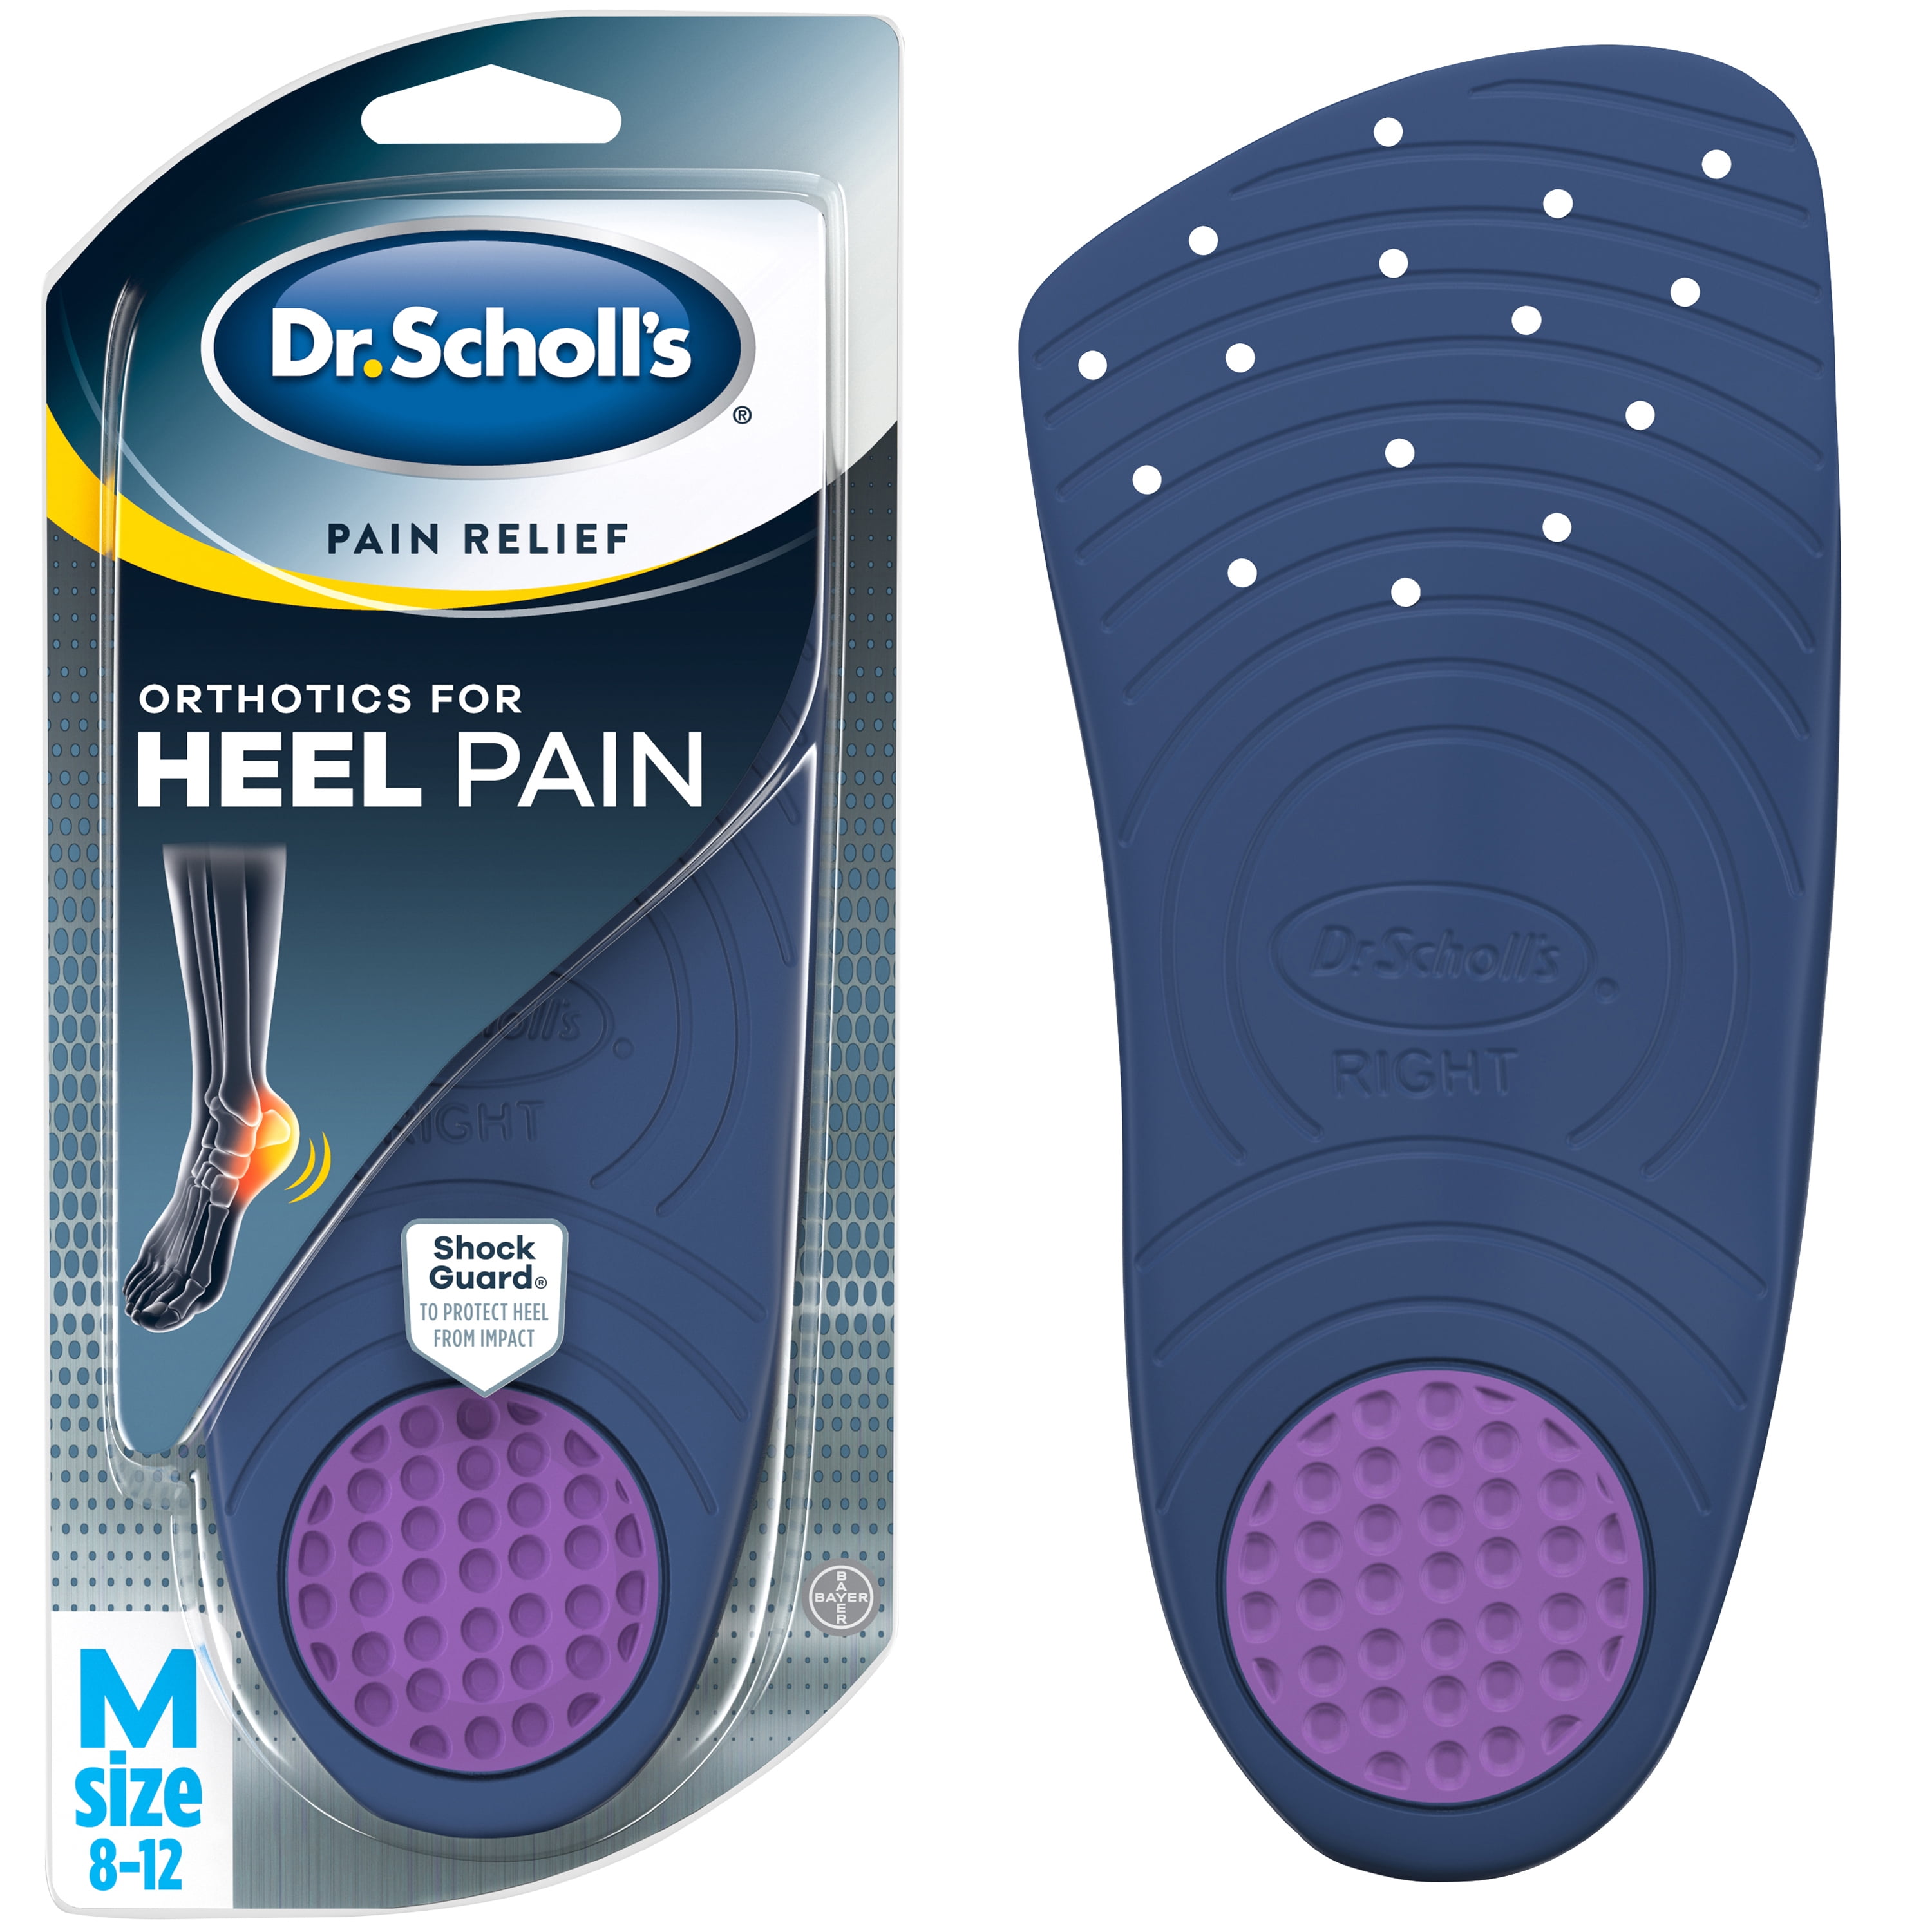 Dr. Scholl's Dr. Scholl’s Heel Pain Relief Orthotic Inserts for Men (8-12) Insoles for Plantar Fasciitis and Heel Spurs